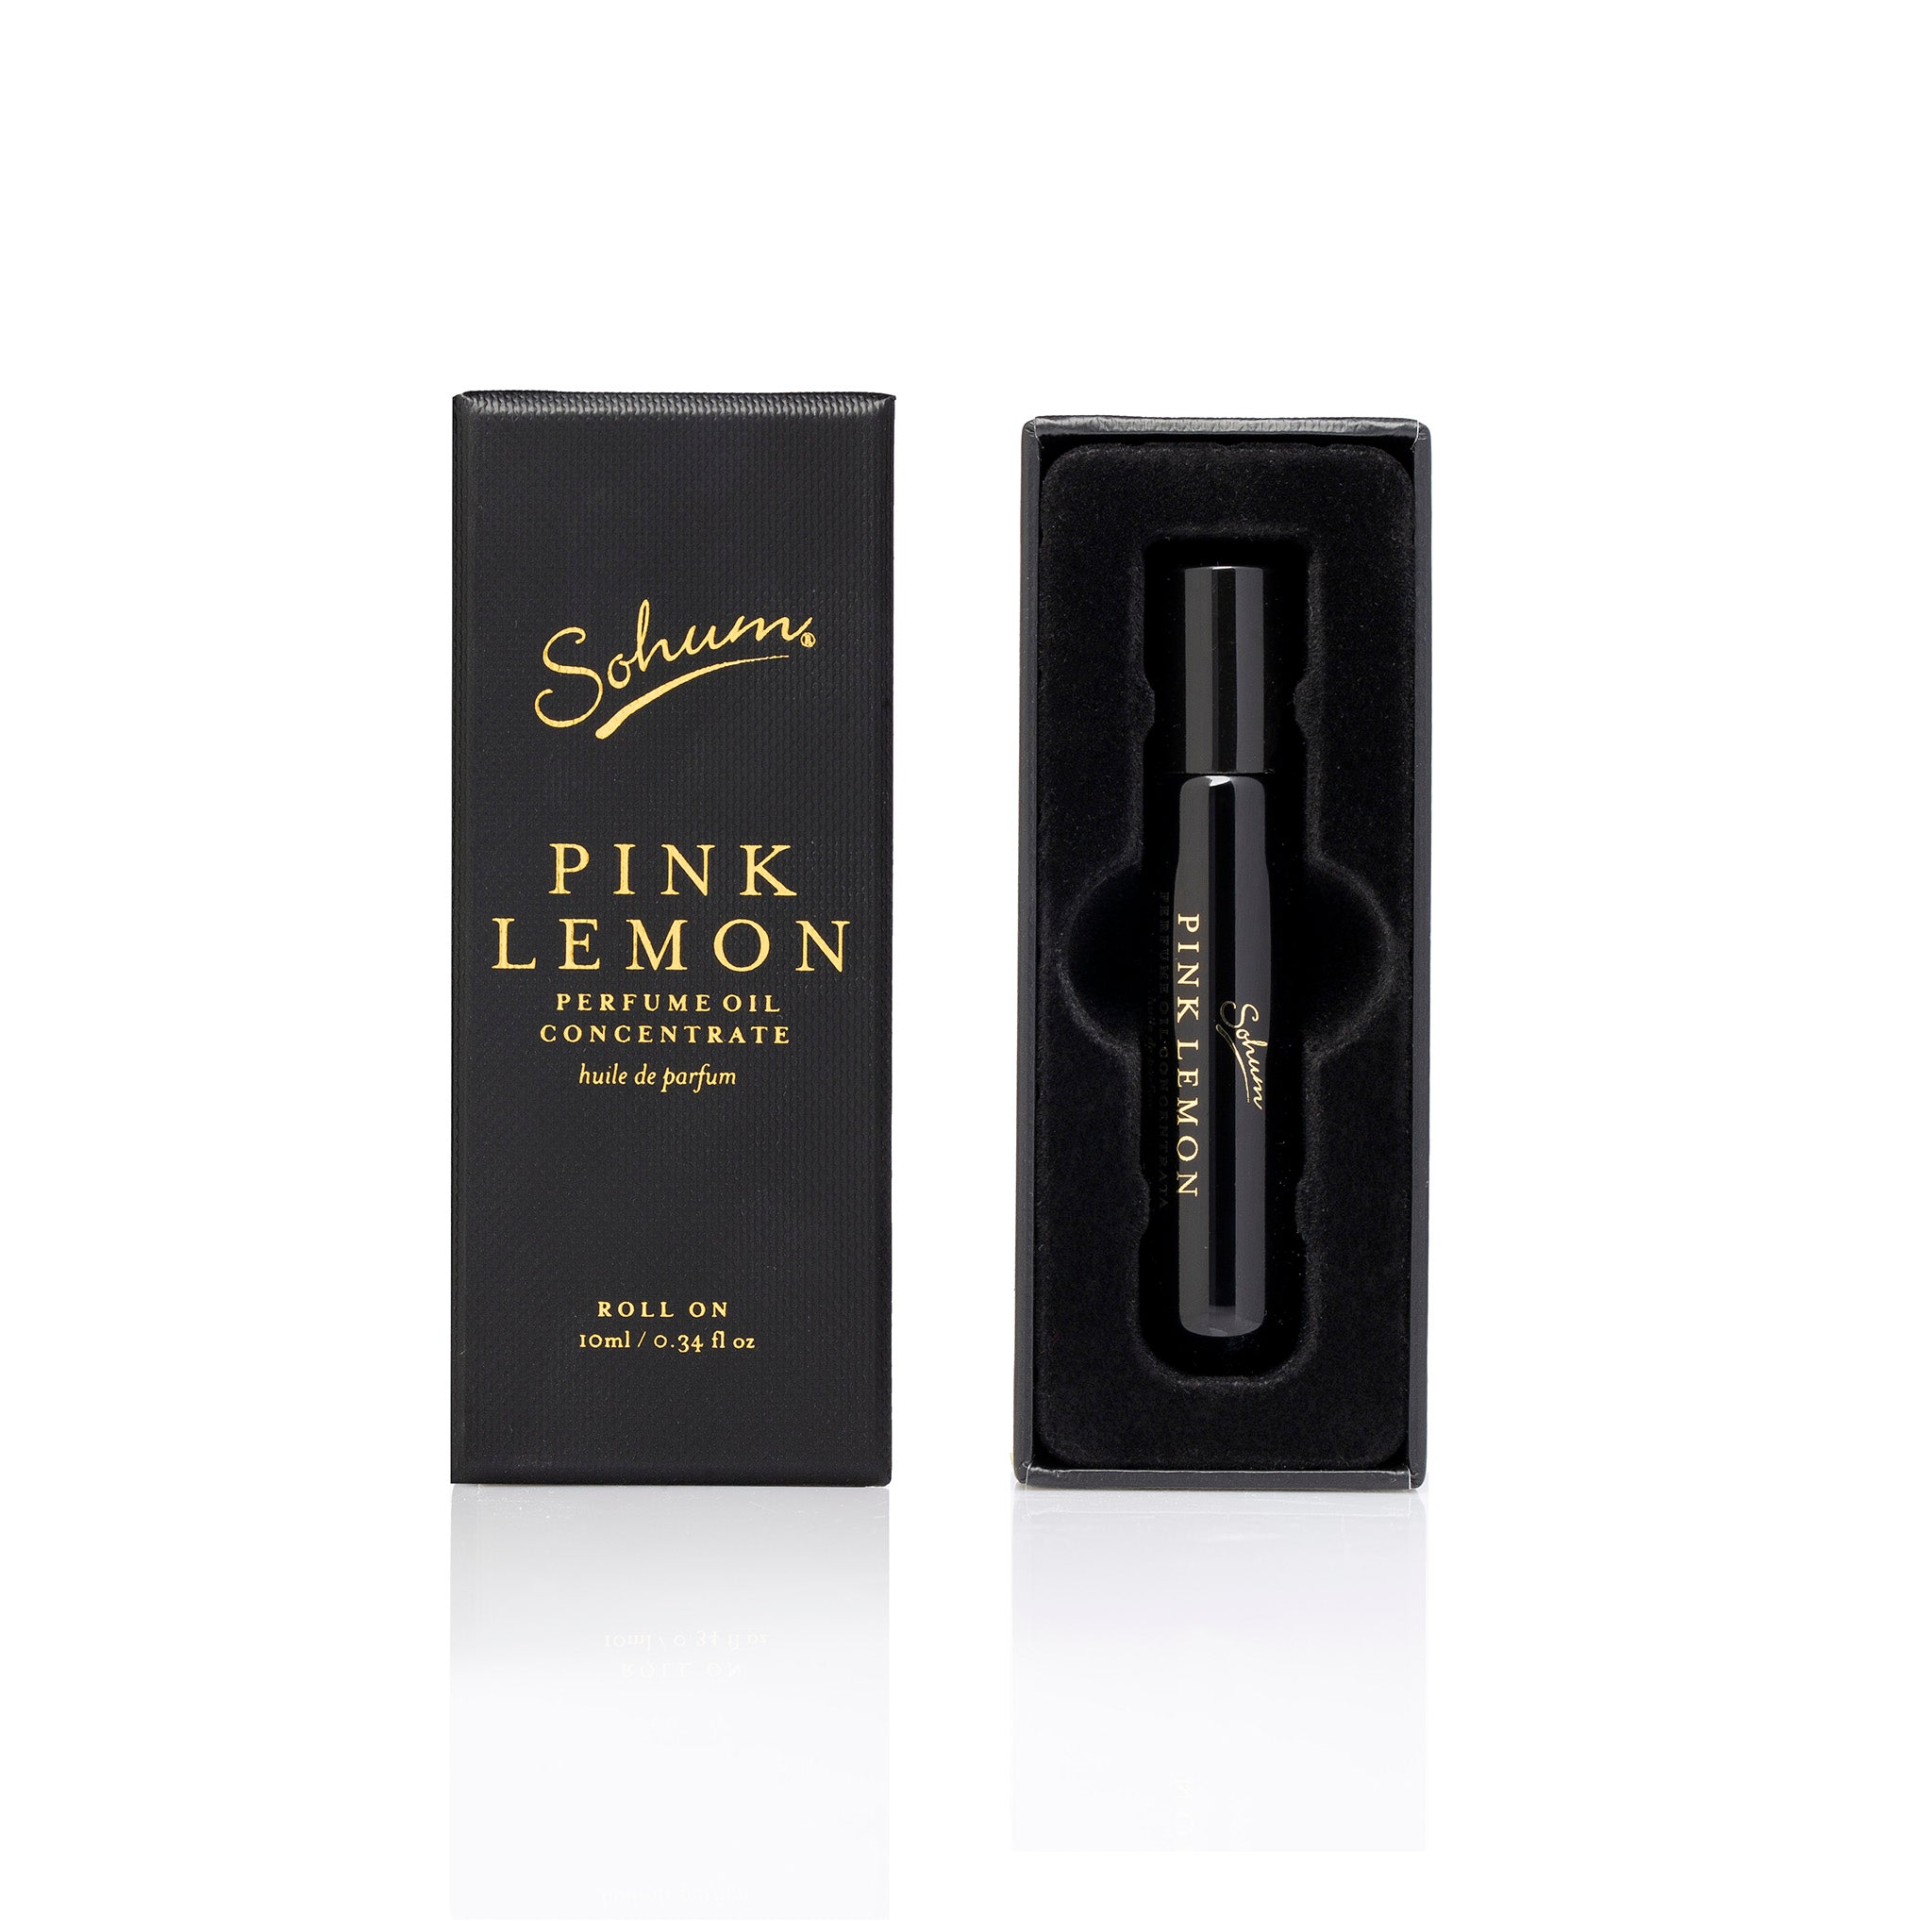 Pink Lemon Perfume Oil Concentrate